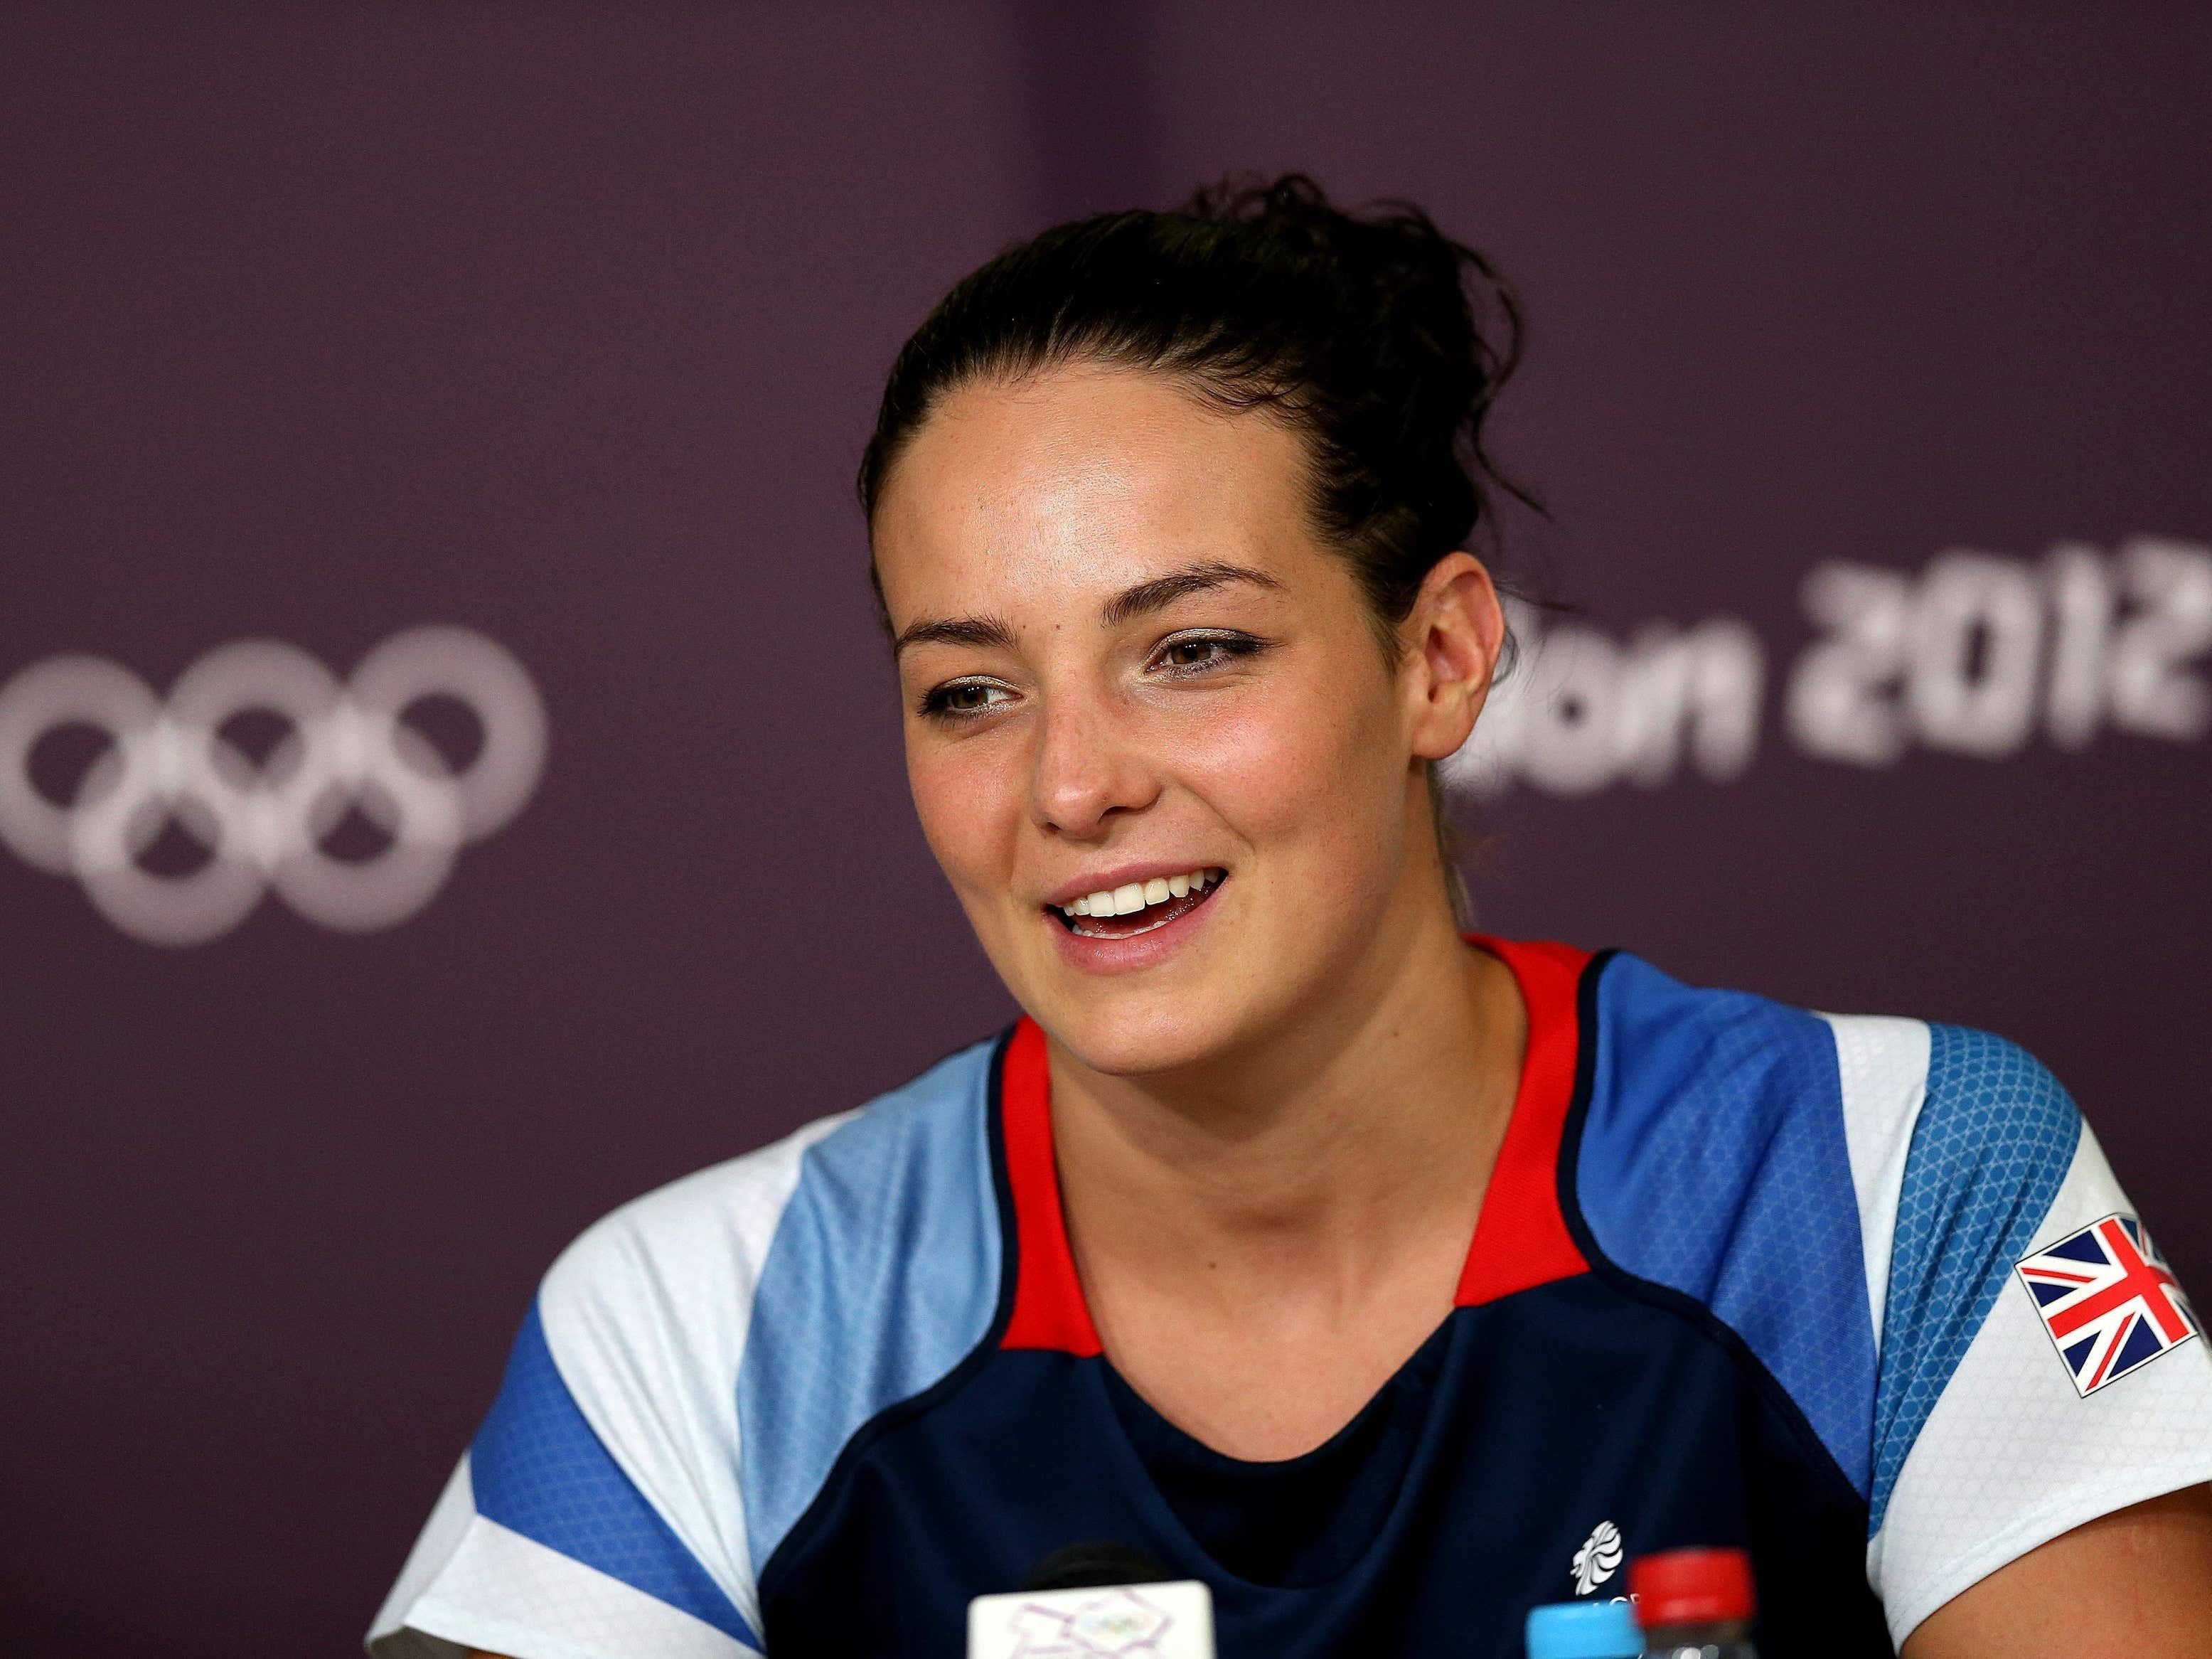 On This Day in 2011: Keri-Anne Payne makes London Olympics after Shanghai win